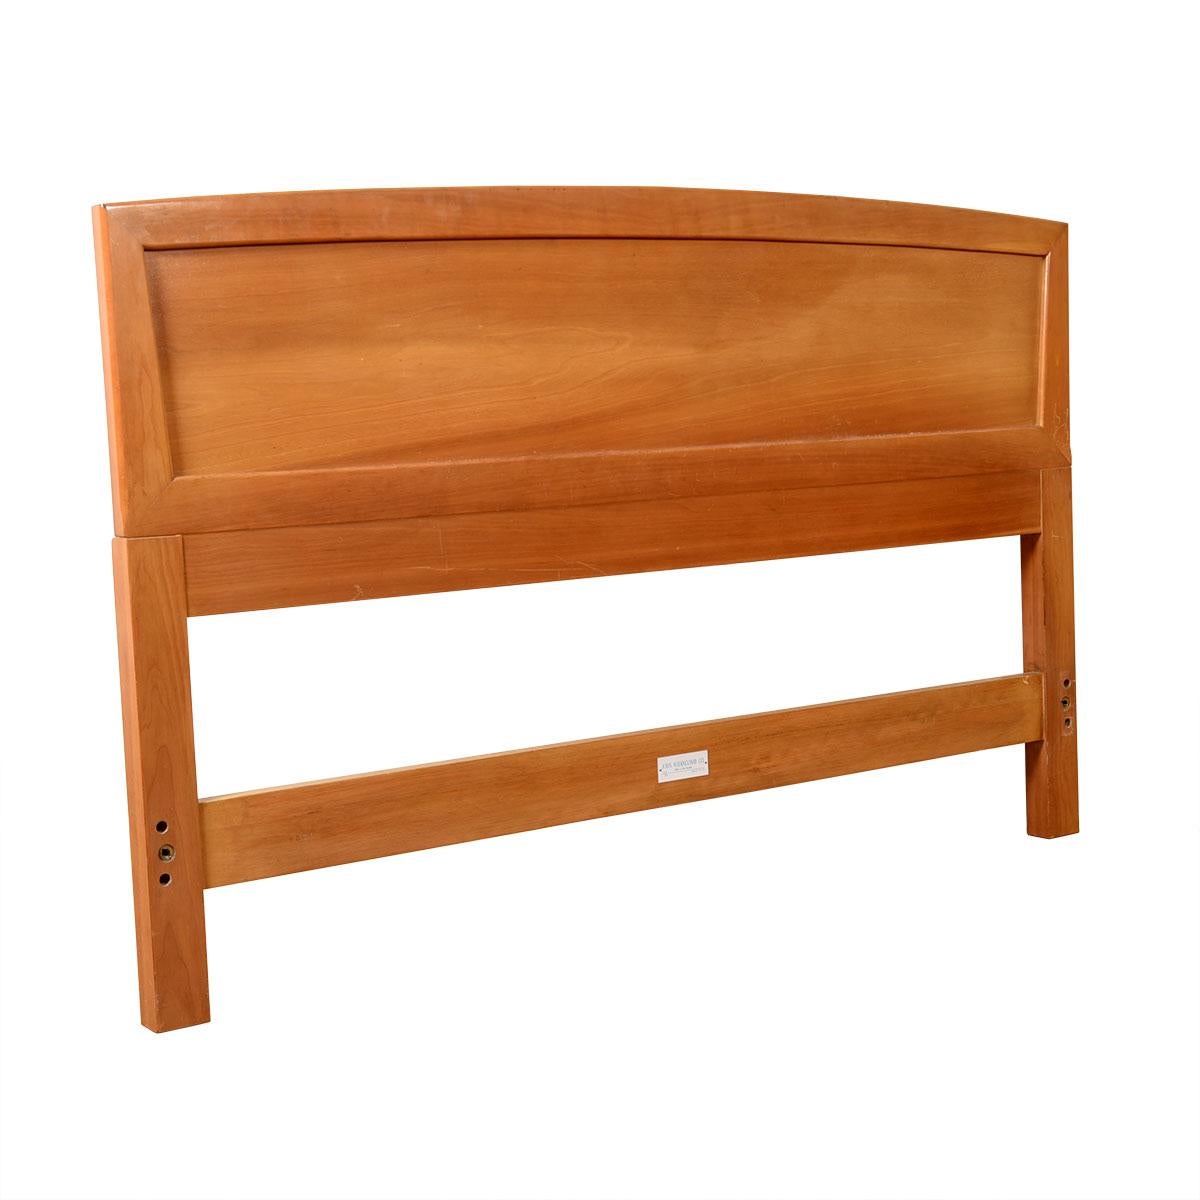 Mid-Century Modern Full-Queen Sized Headboard by John Widdicomb 

Additional information:
Material: walnut
Gracious John Widdicomb style & quality.
A gentle arc of walnut forms this timeless headboard.
Subtle angle on each side of the frame is